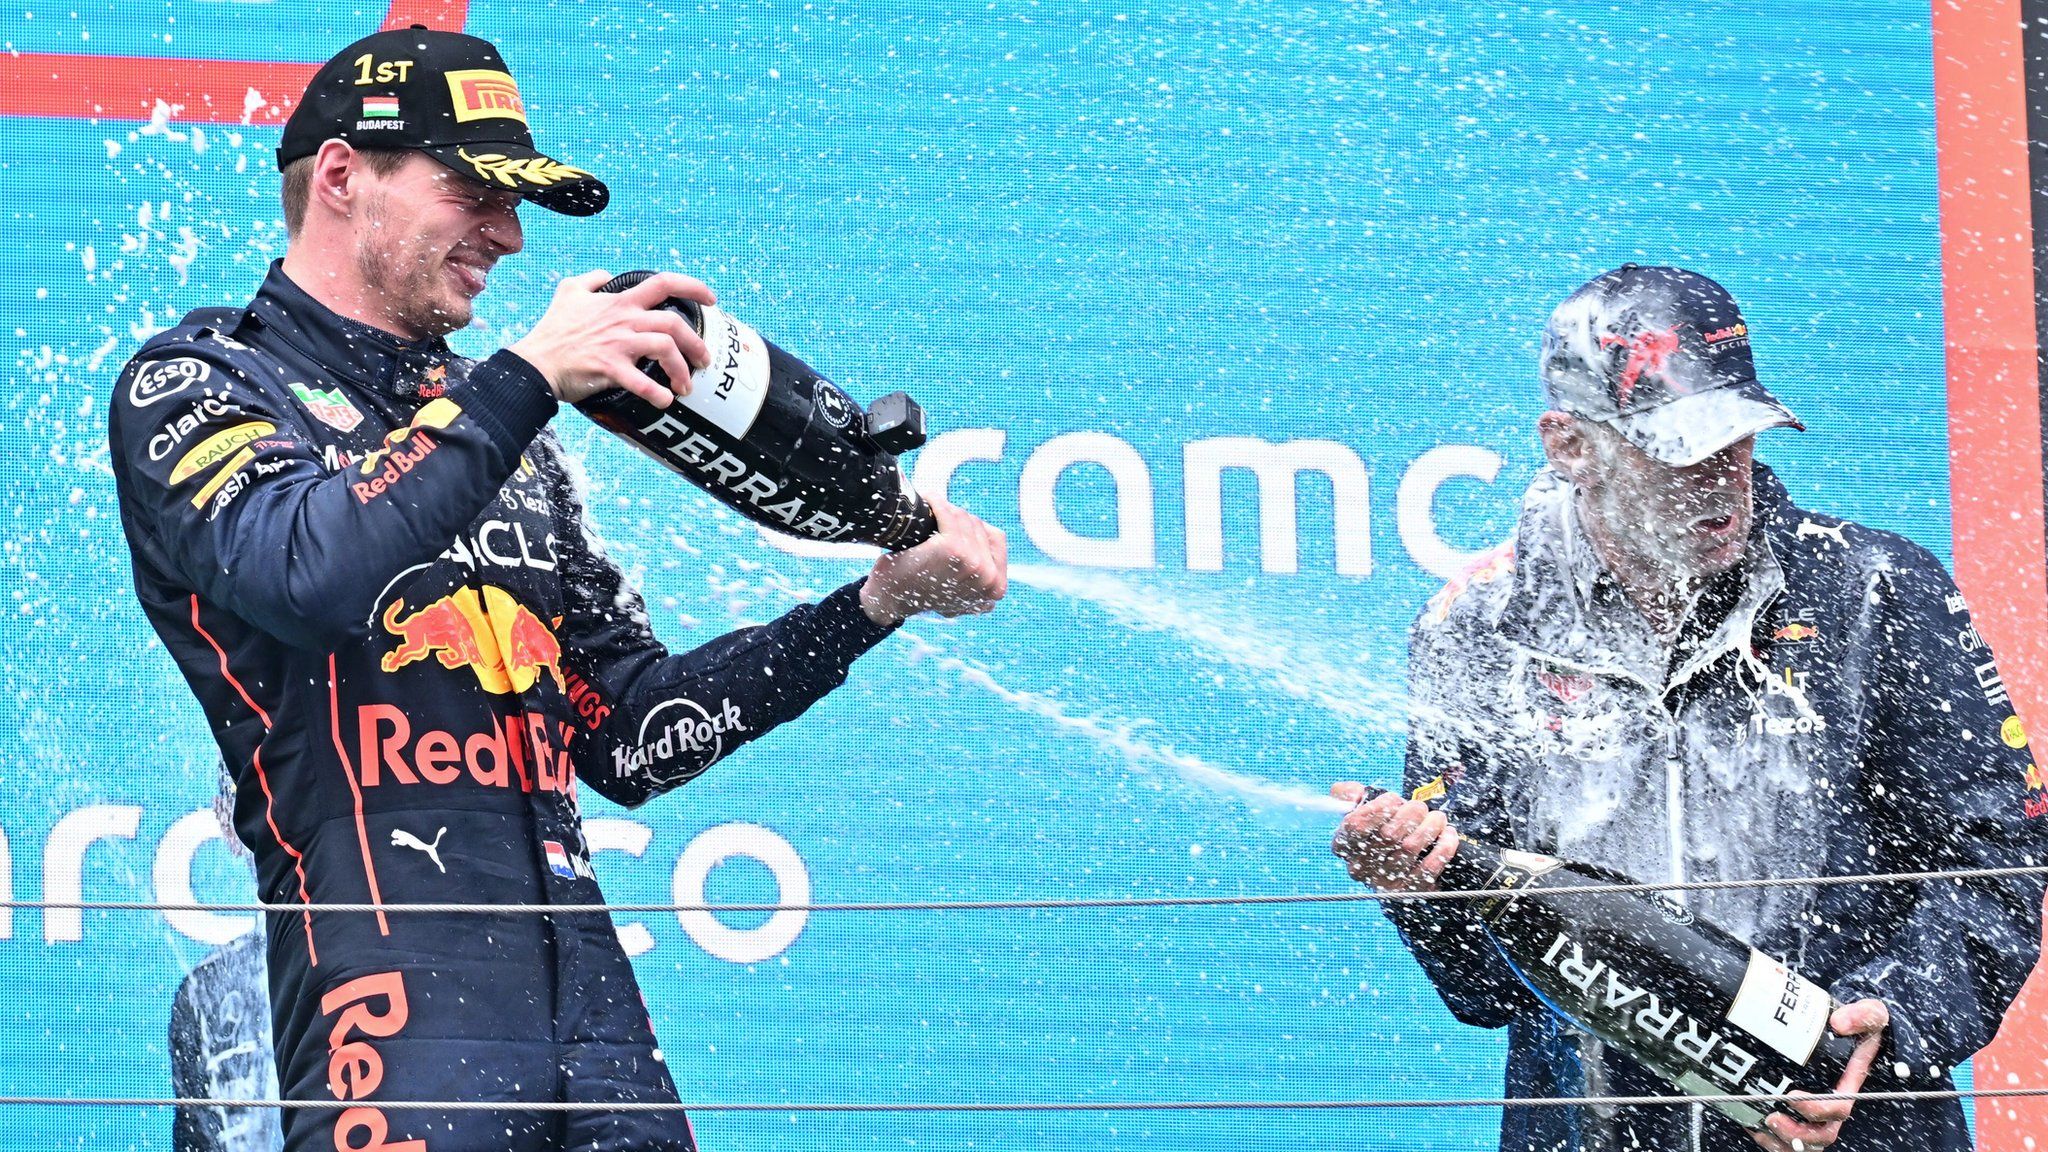 Red Bull's Max Verstappen and Adrian Newey celebrate victory at the Hungarian Grand Prix